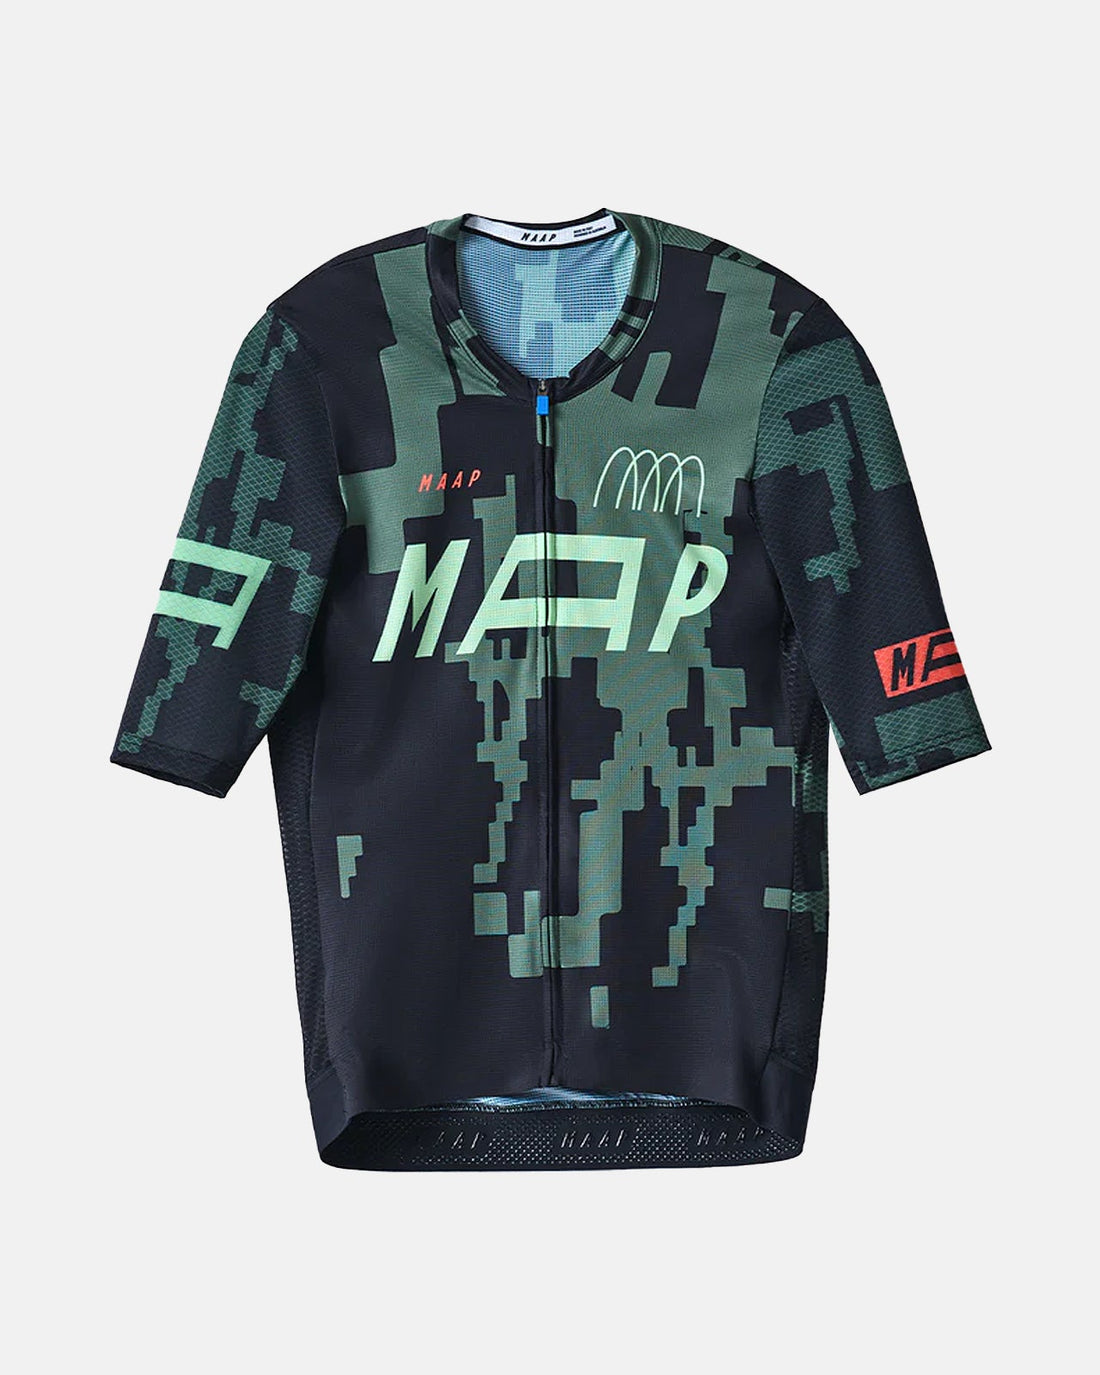 Adapted F.0 Pro Air Jersey 2.0 - Black - MAAP